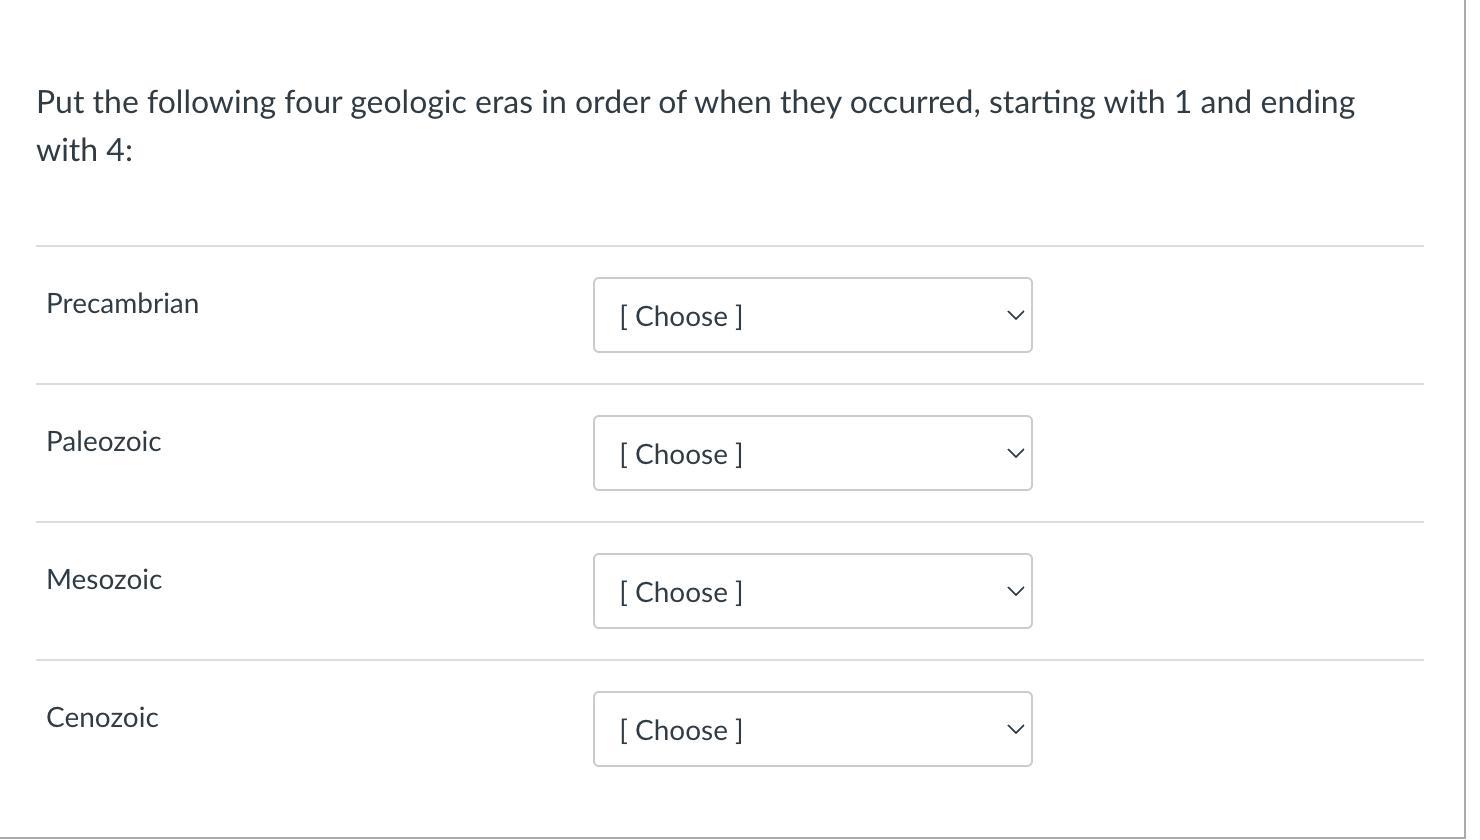 Put The Following Four Geologic Eras In Order Of When They Occurred, Starting With 1 And Ending With